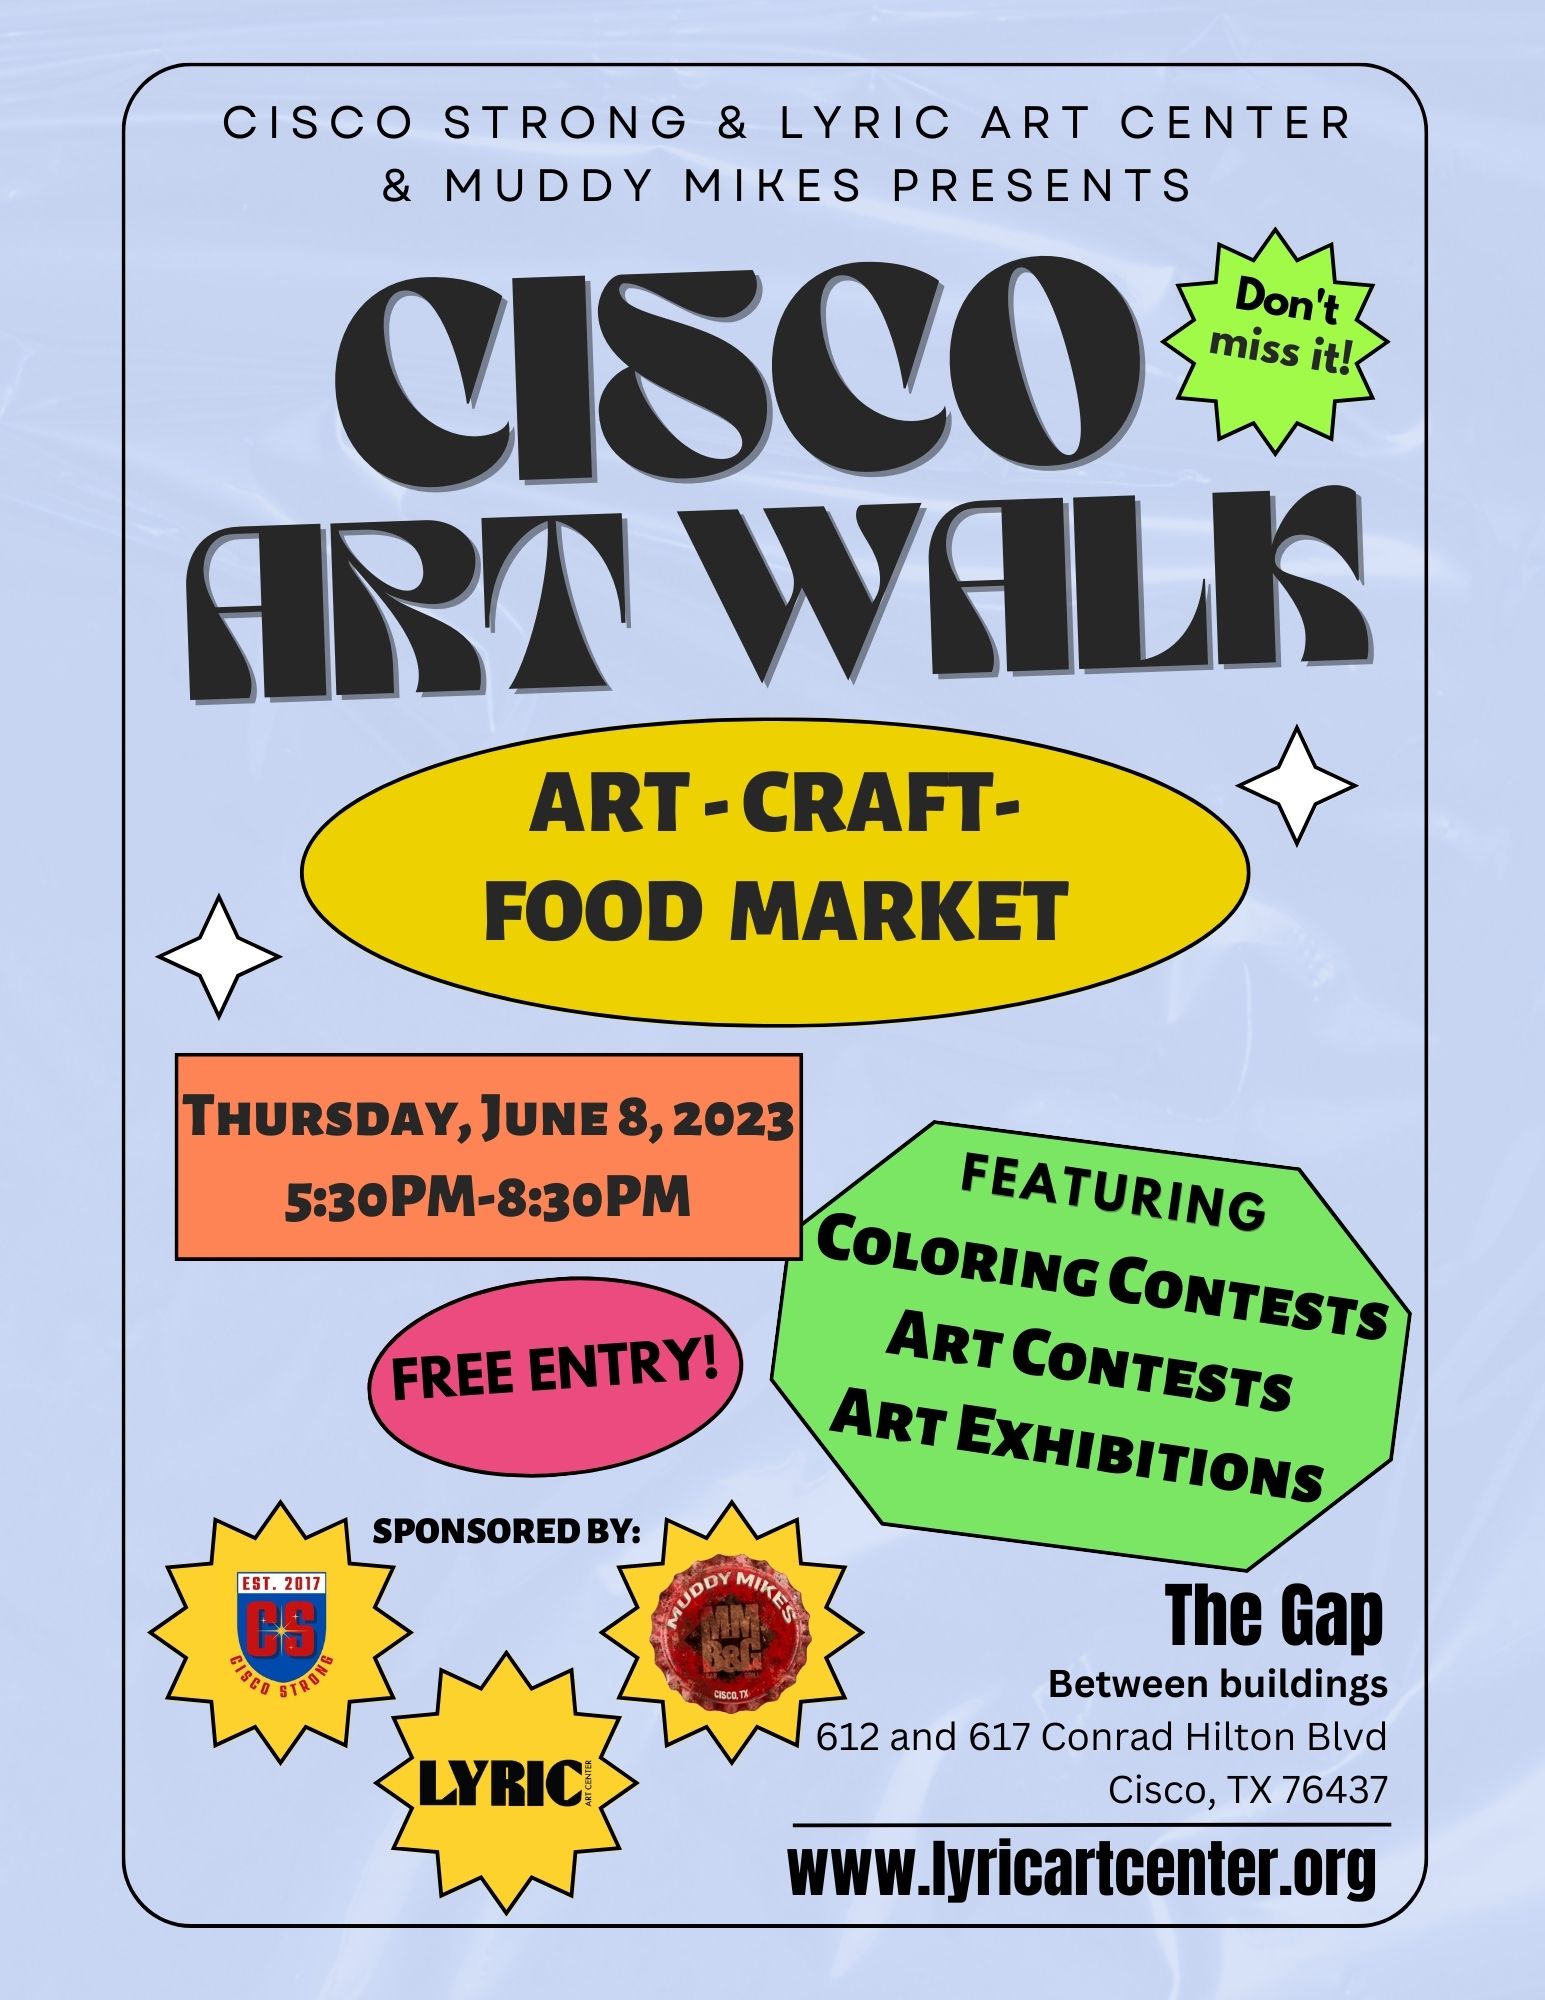 Art-Craft-Food Market, featuring coloring contests, art contests, art exhibits.  FREE Entry! ...